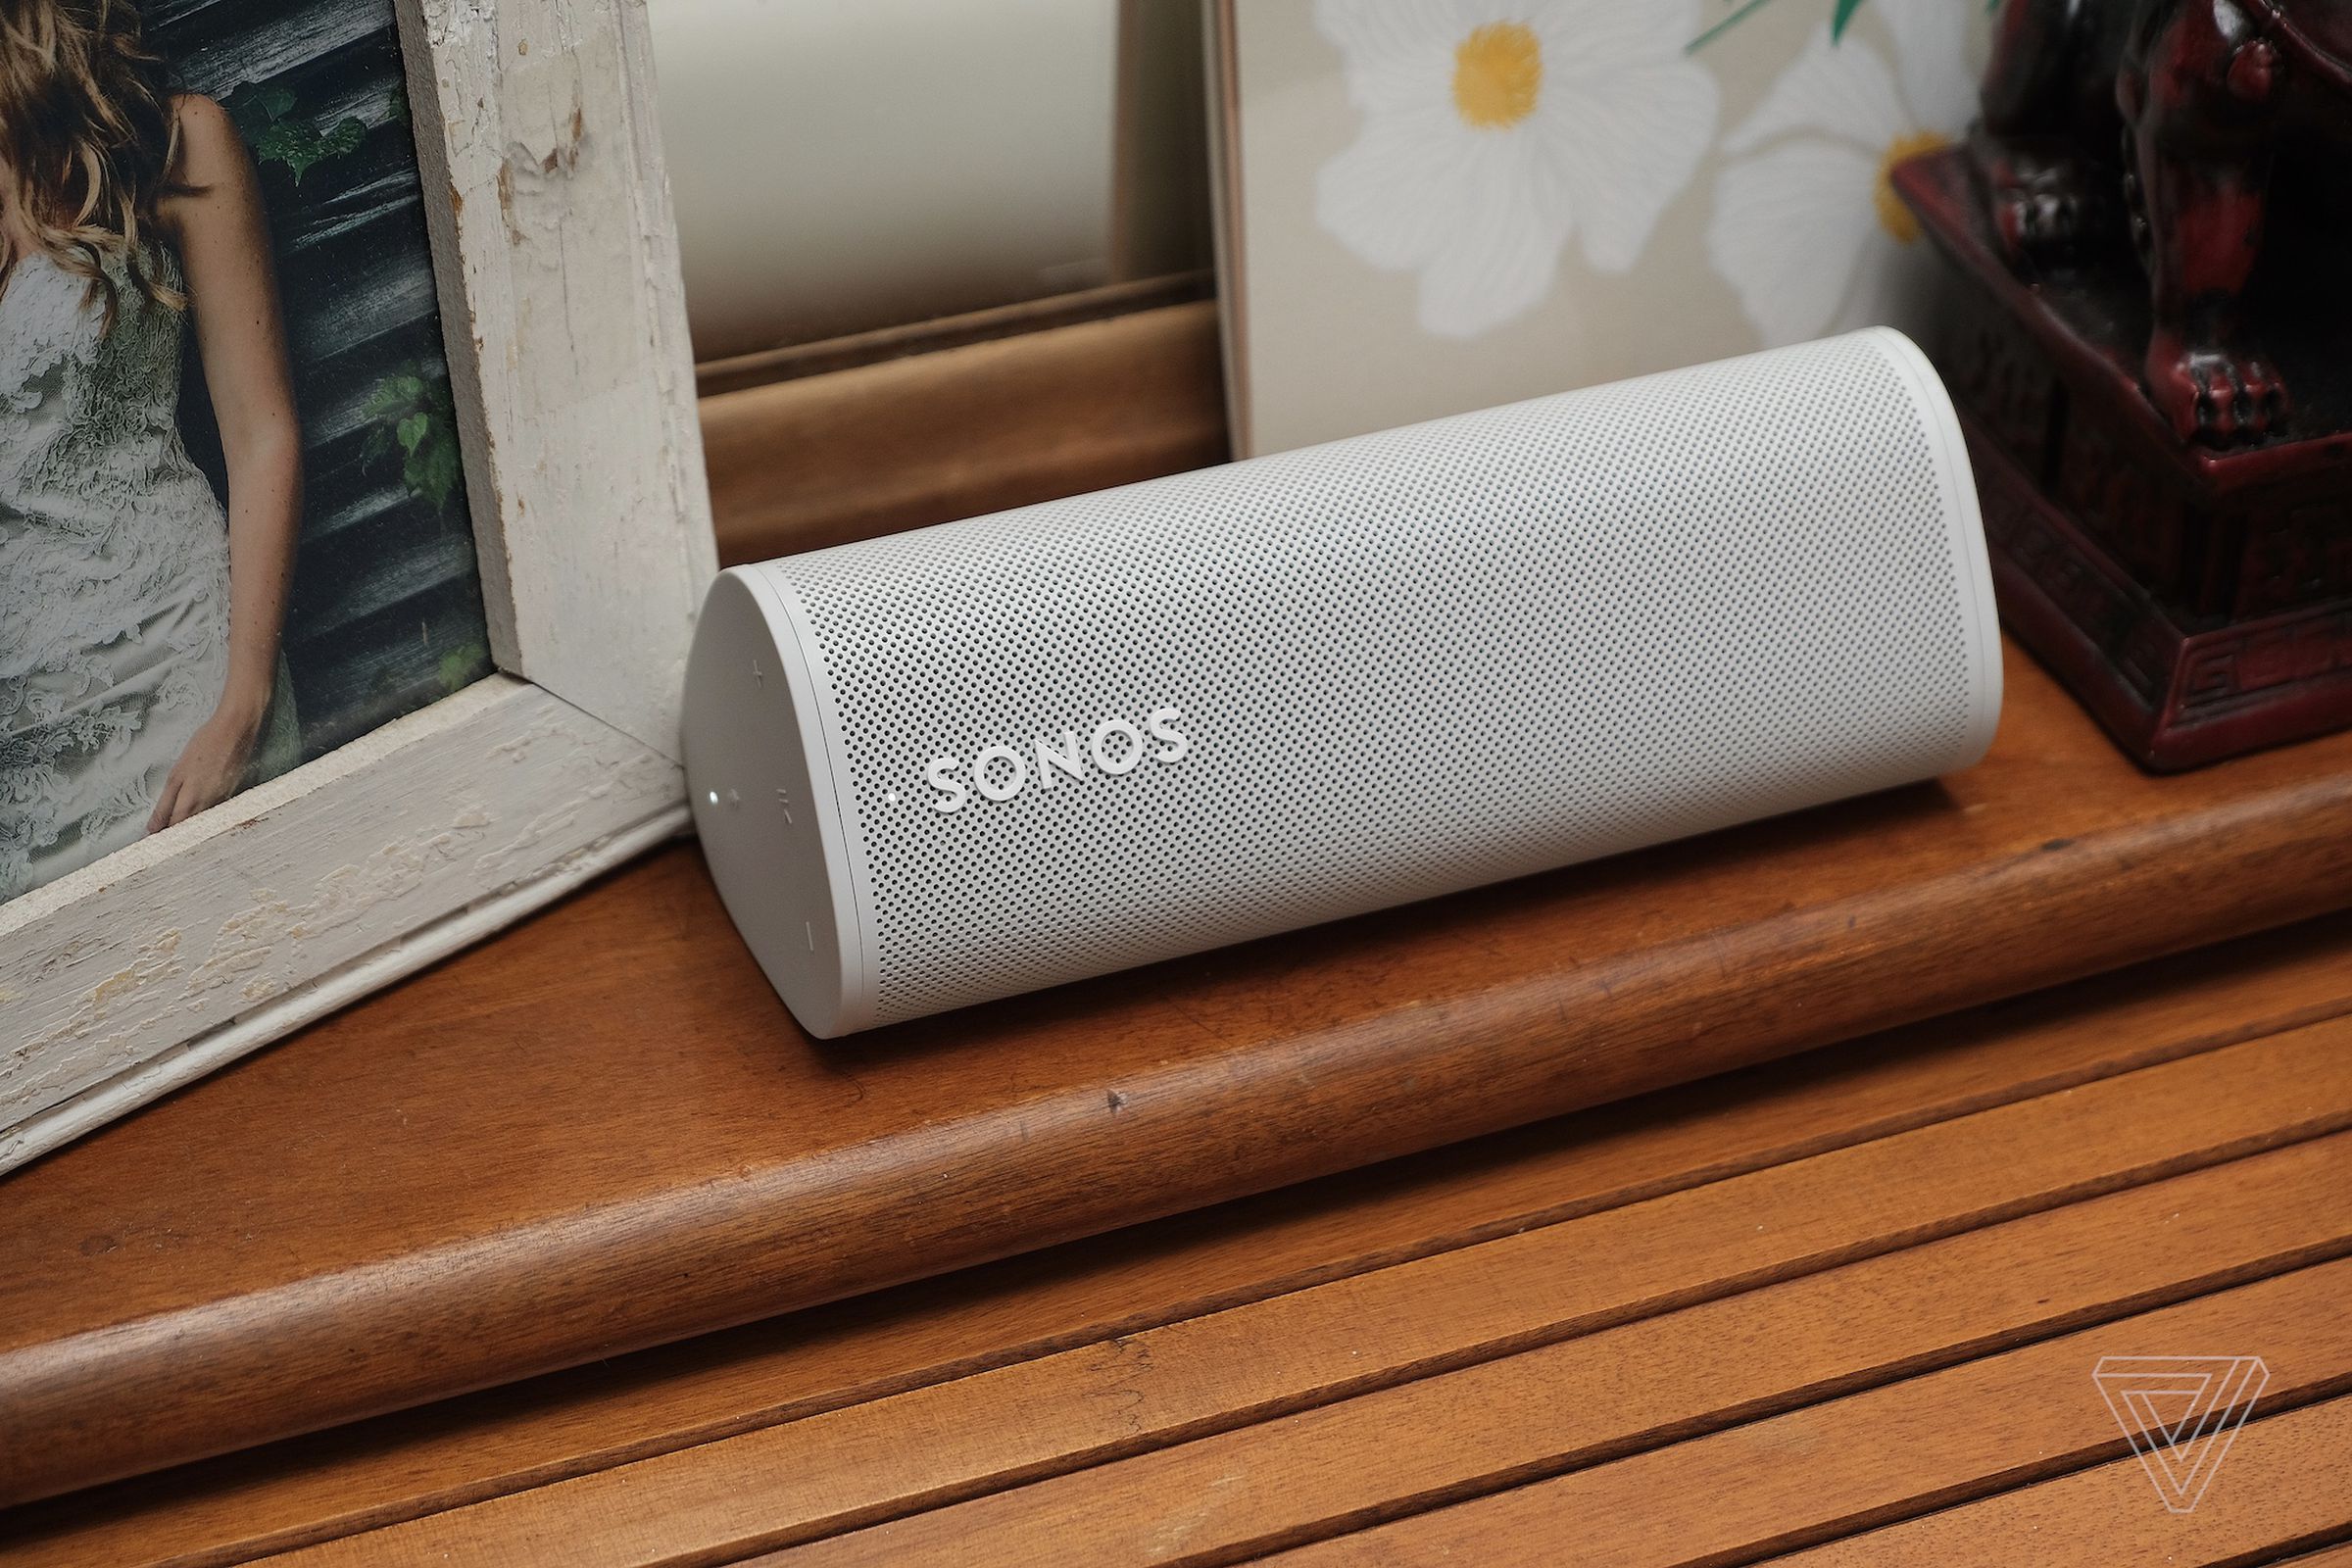 The Roam’s many features make it among the best portable speakers at its size.